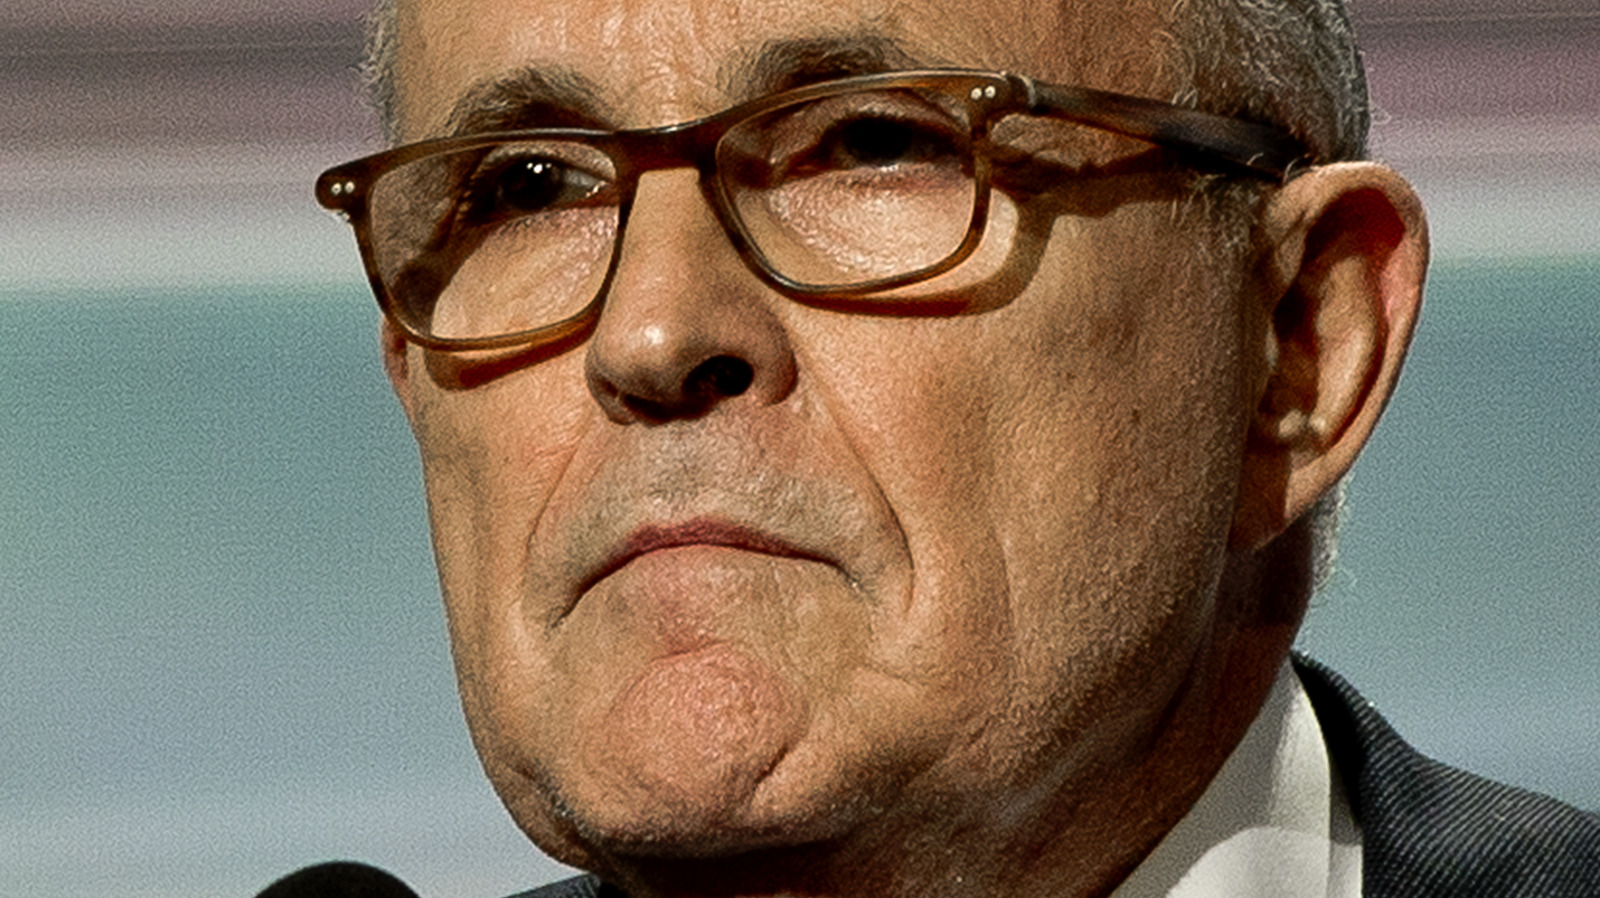 Rudy Giuliani’s Viral Fight With Grocery Store Employee Fully Explained